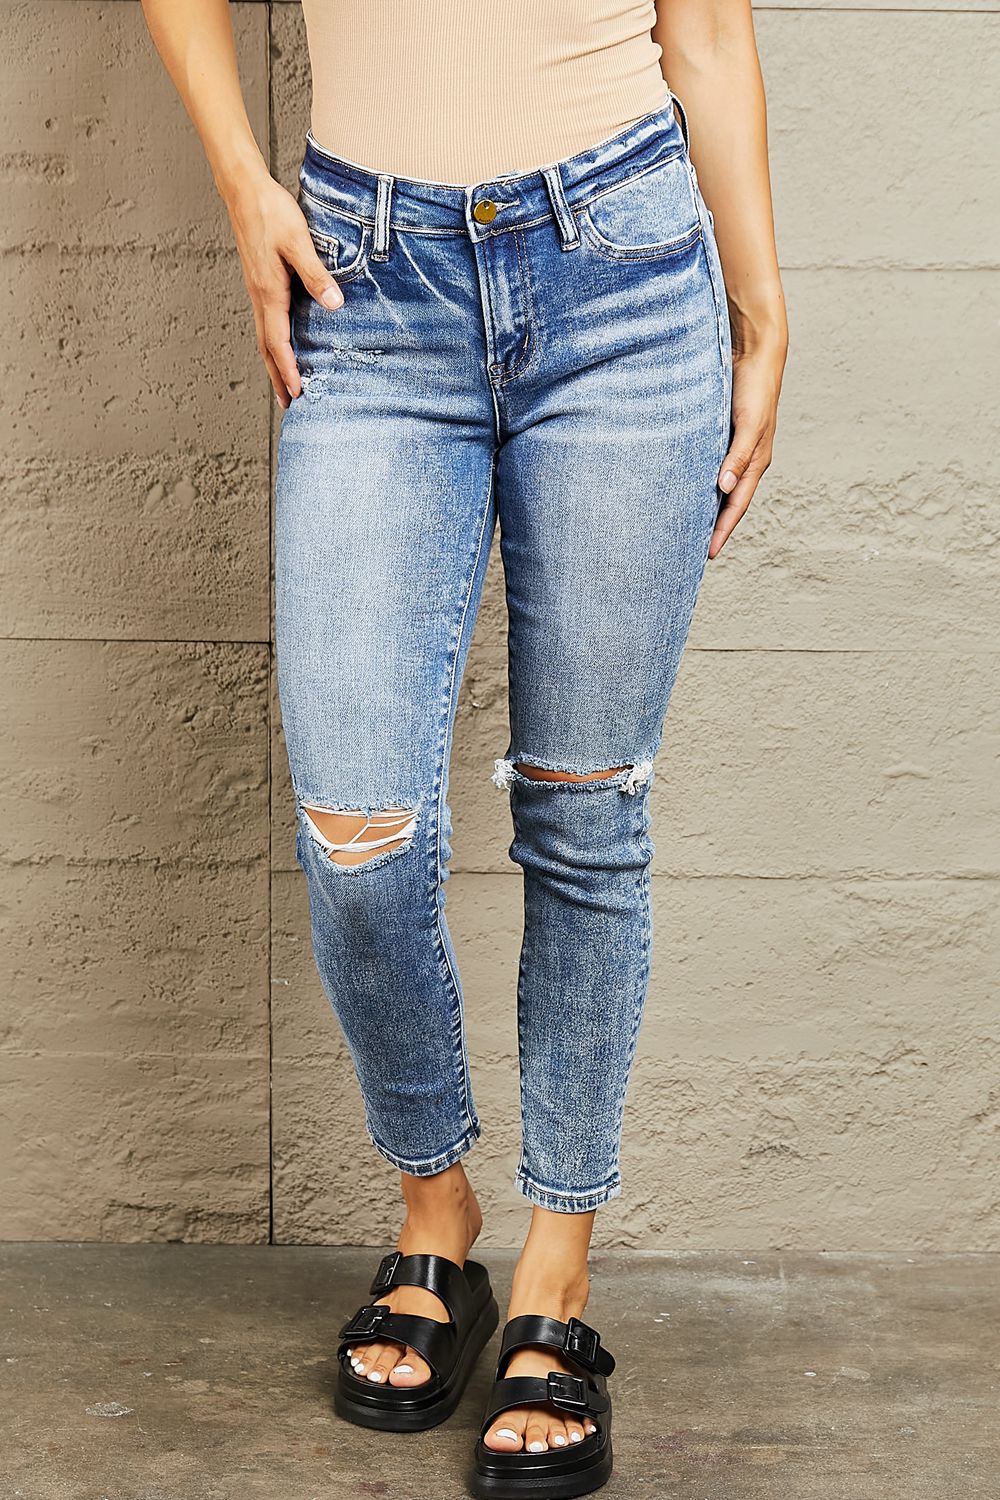 BAYEAS Mid Rise Distressed Skinny Jeans - nailedmoms